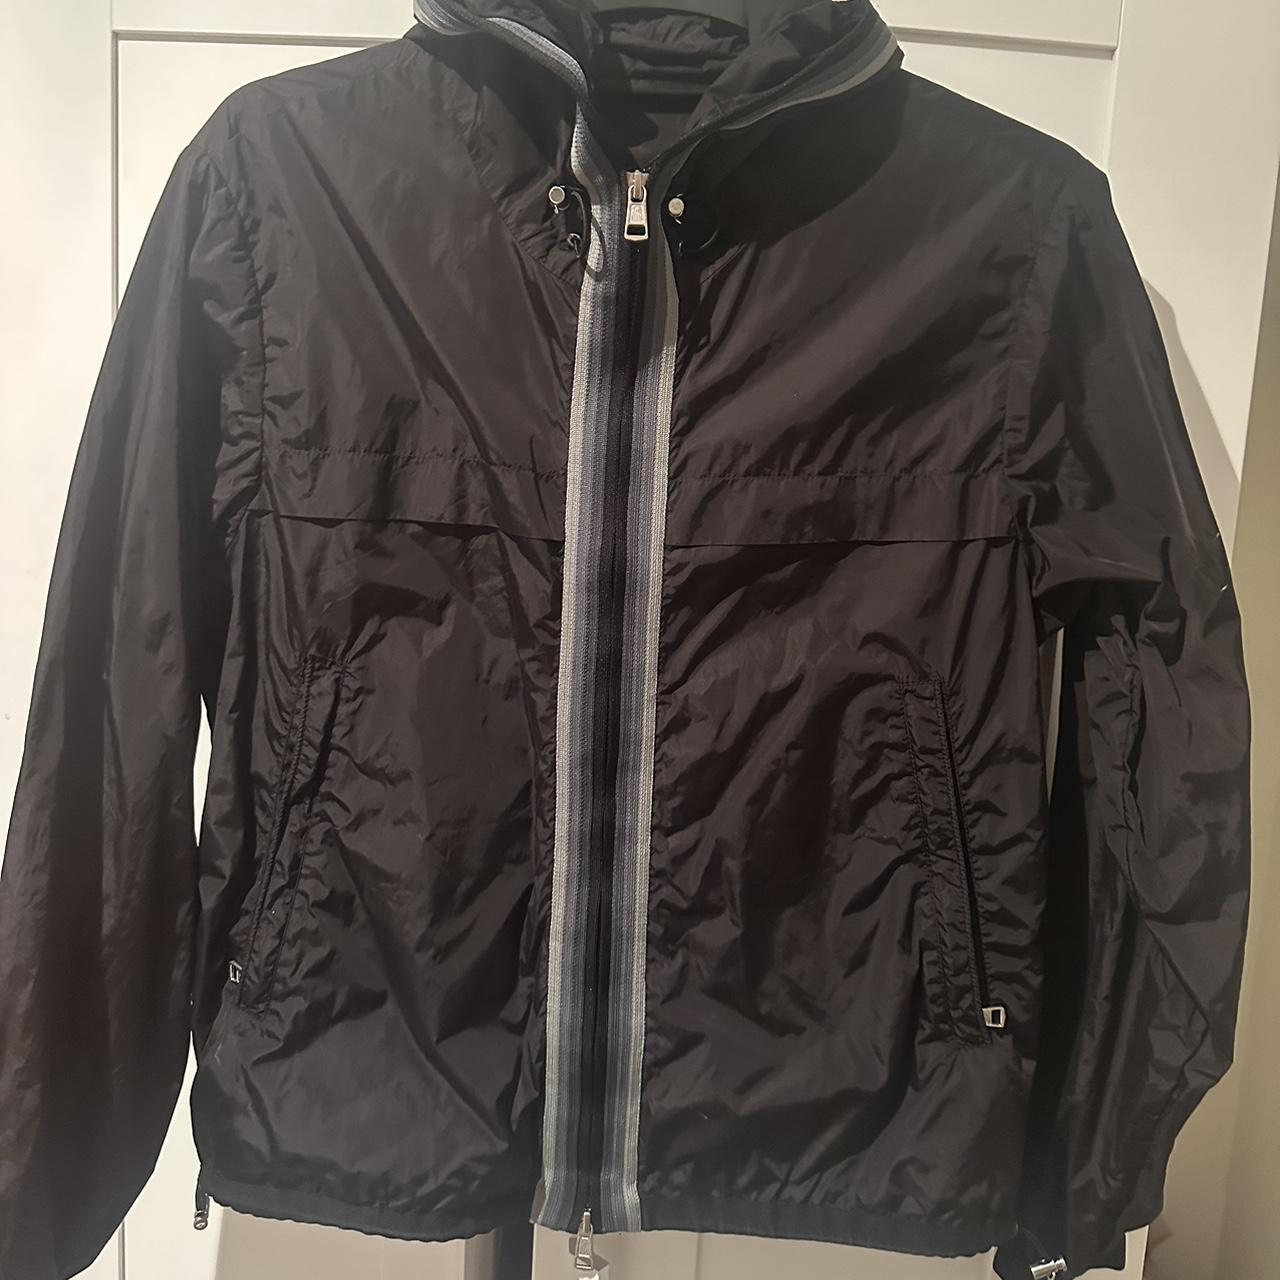 Moncler anton jacket good condition just doesn’t fit... - Depop